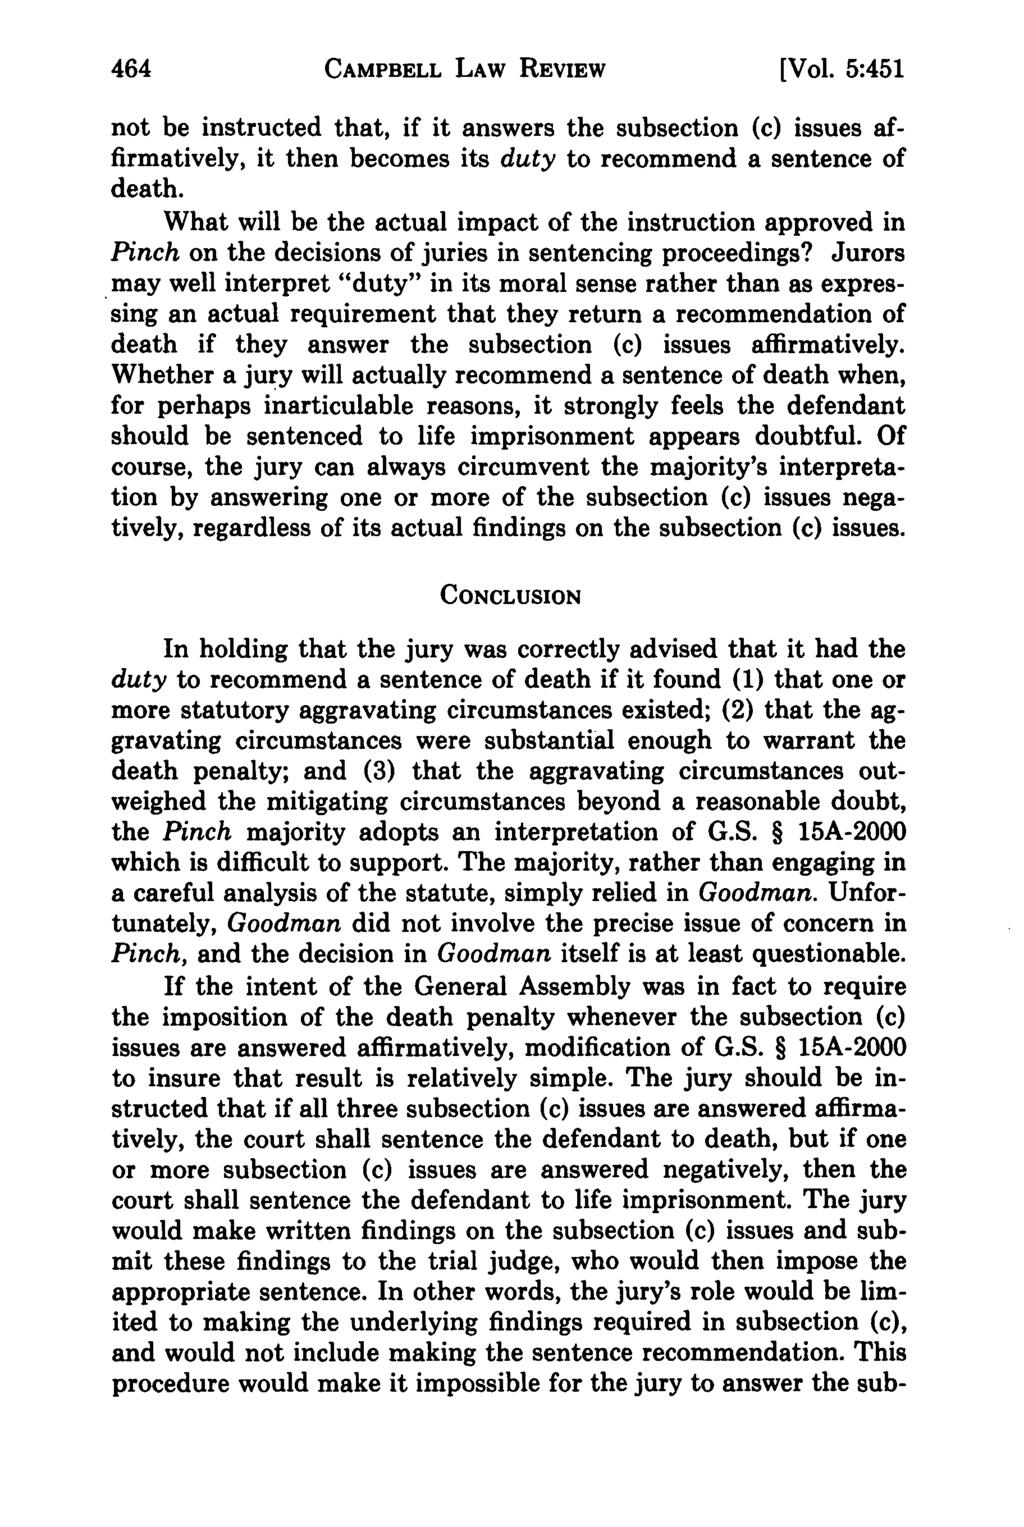 464 Campbell Law Review, Vol. 5, Iss. 2 [1983], Art. 8 CAMPBELL LAW REVIEW [Vol.